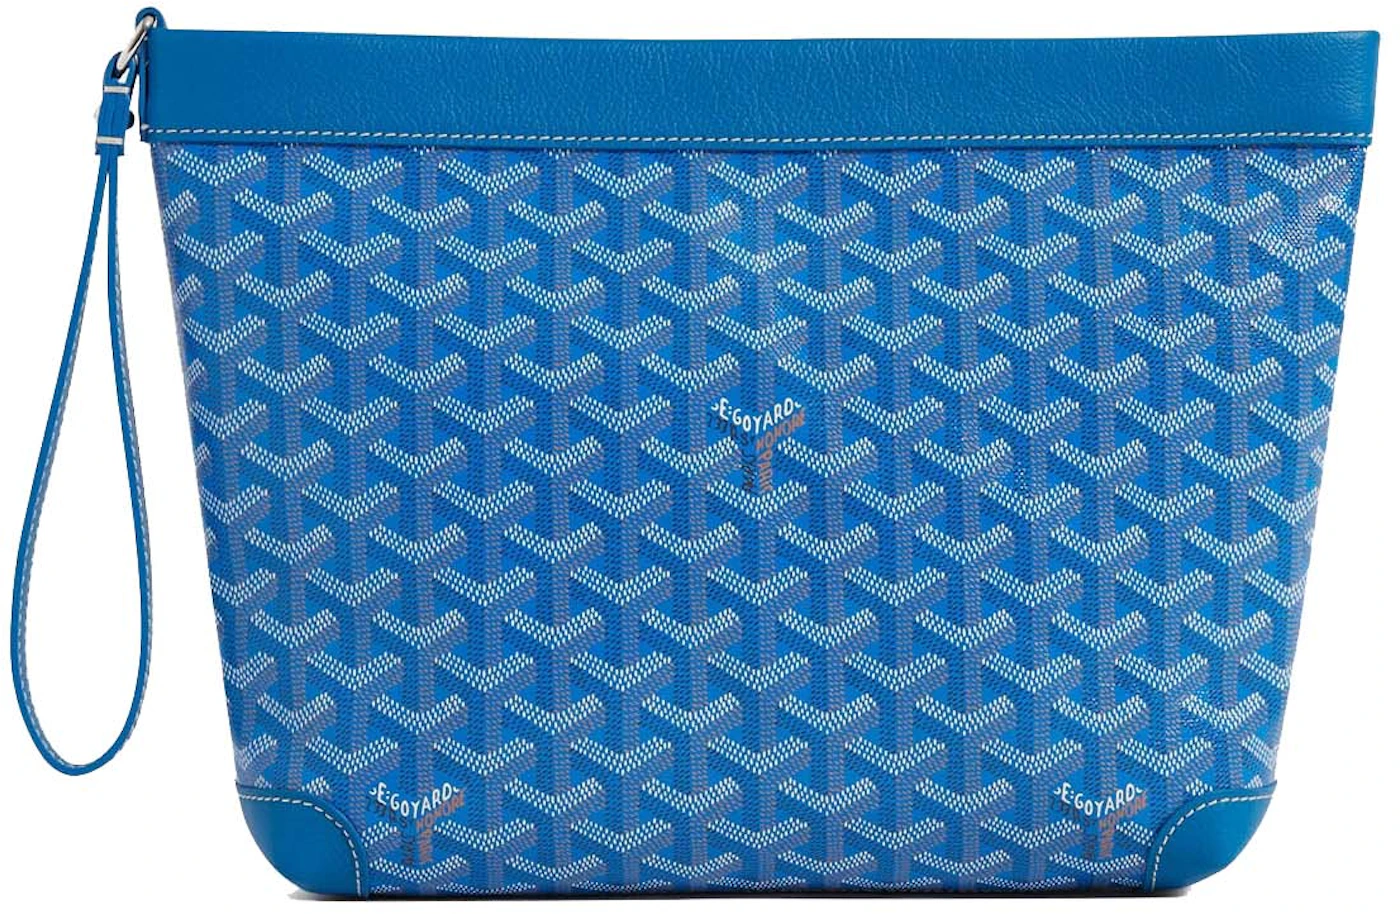 Get Versatile With The New Goyard Conti Pouch - BAGAHOLICBOY